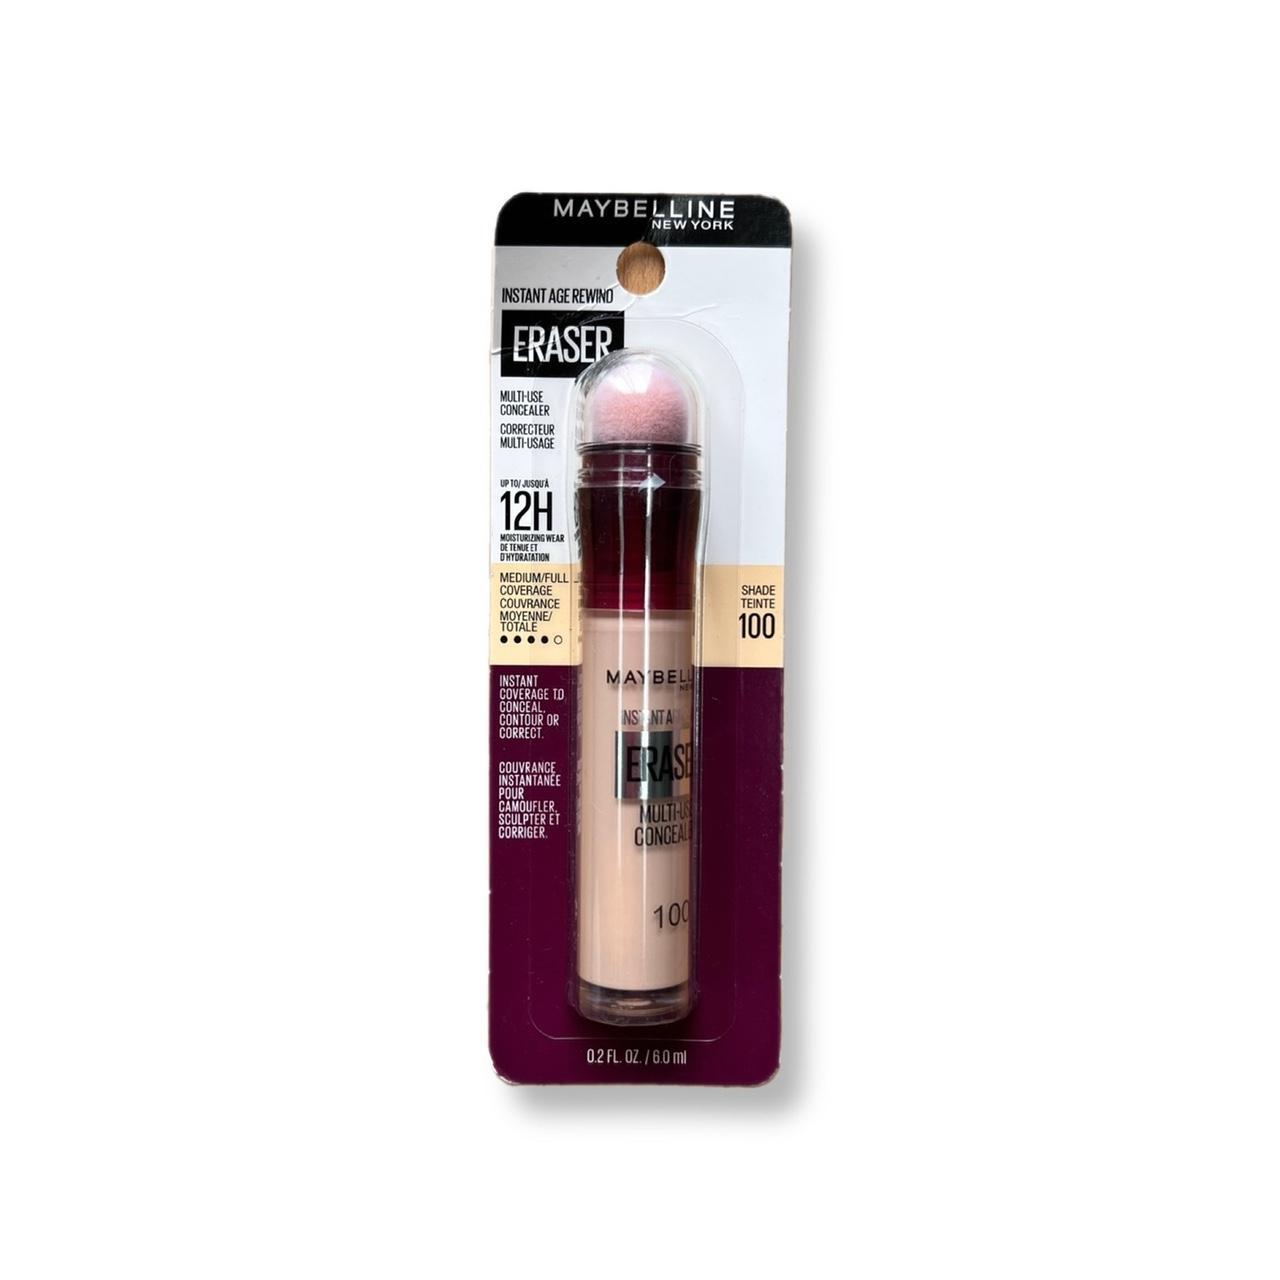 Maybelline Tan and Brown Makeup (2)